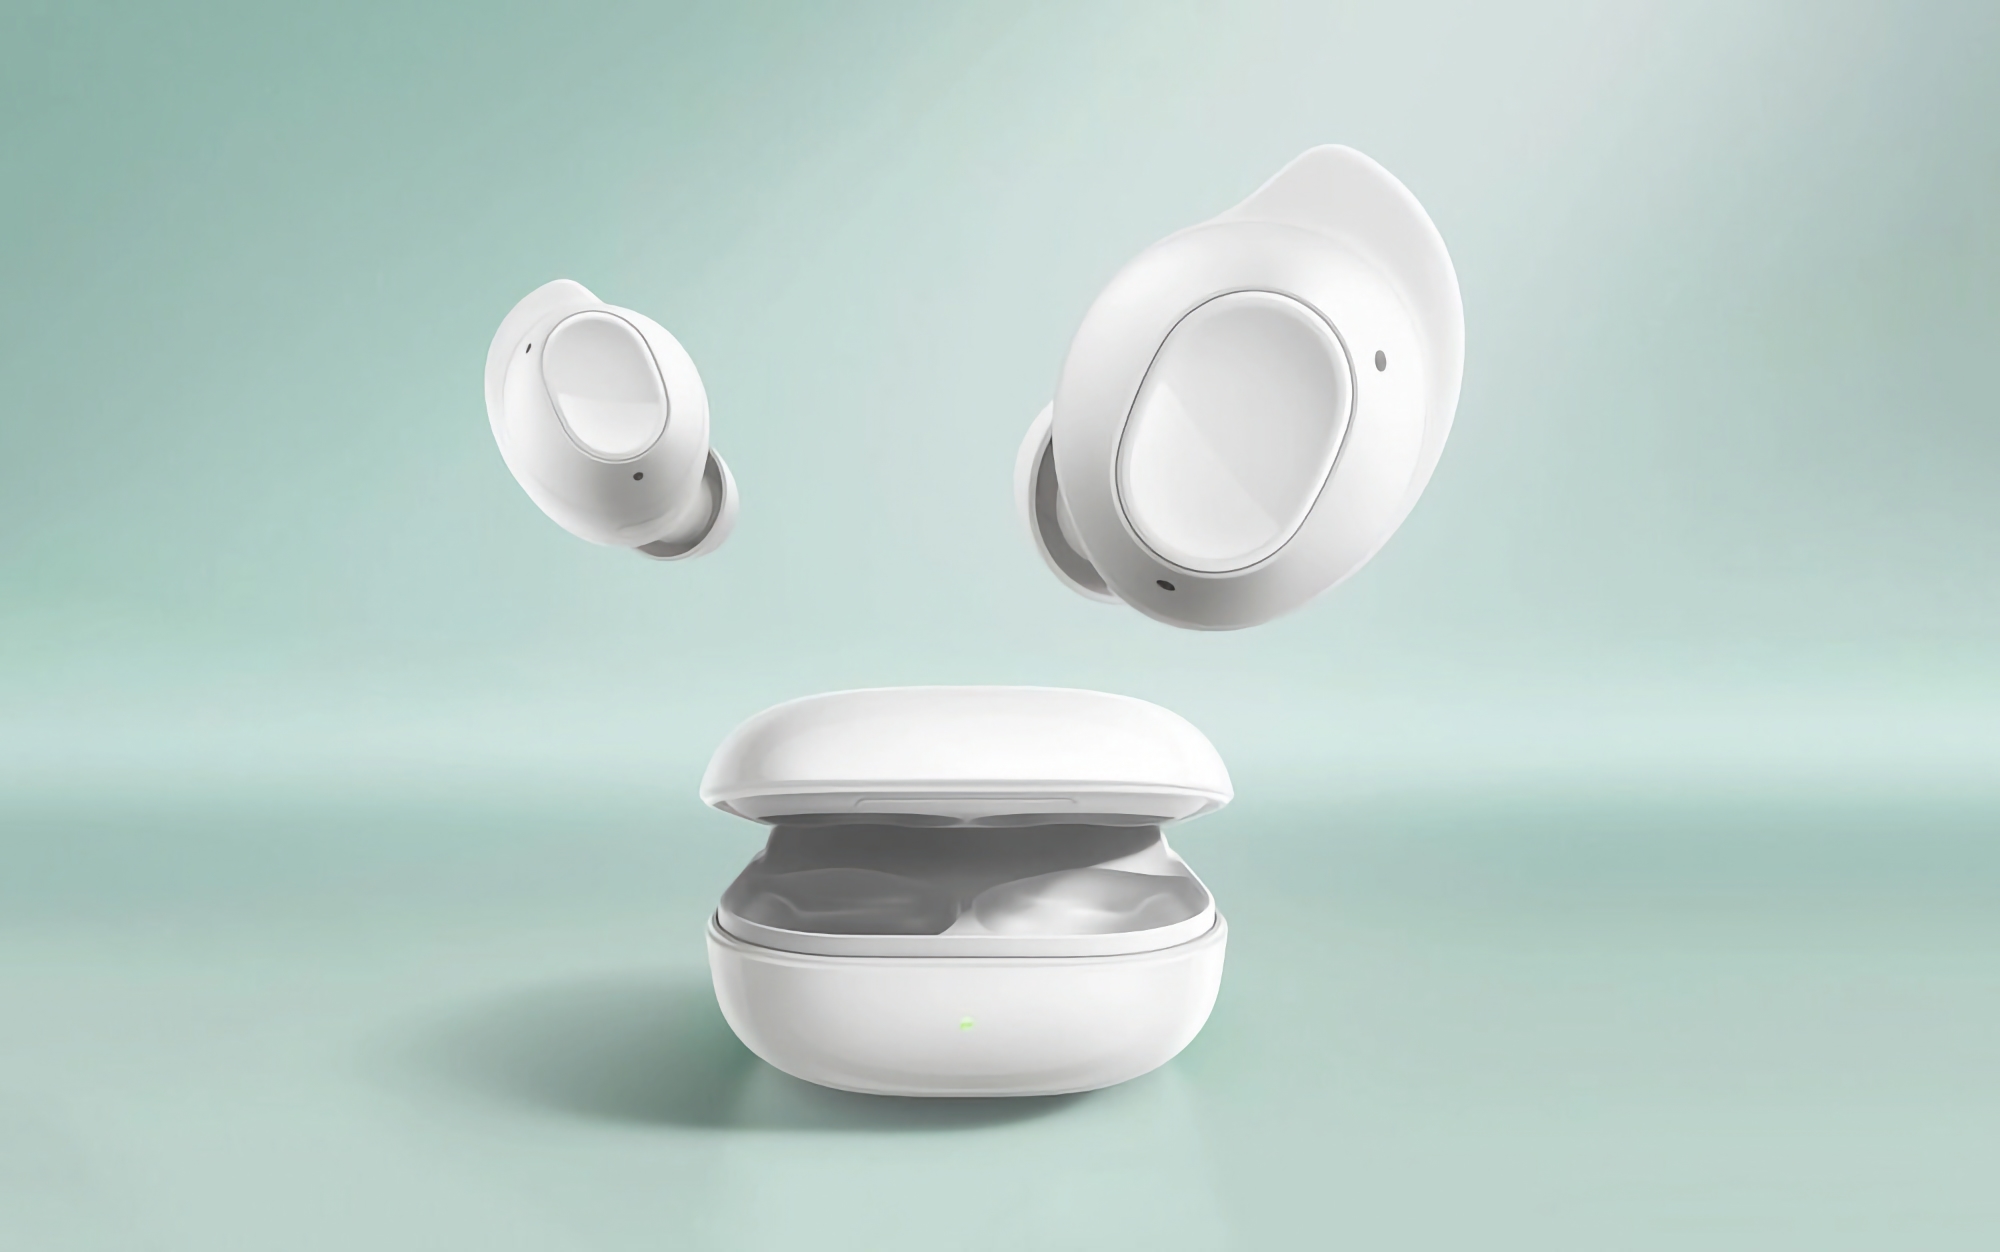 Not just Galaxy Buds 3 Pro: Samsung is working on Galaxy Buds 3, headphones to debut this year